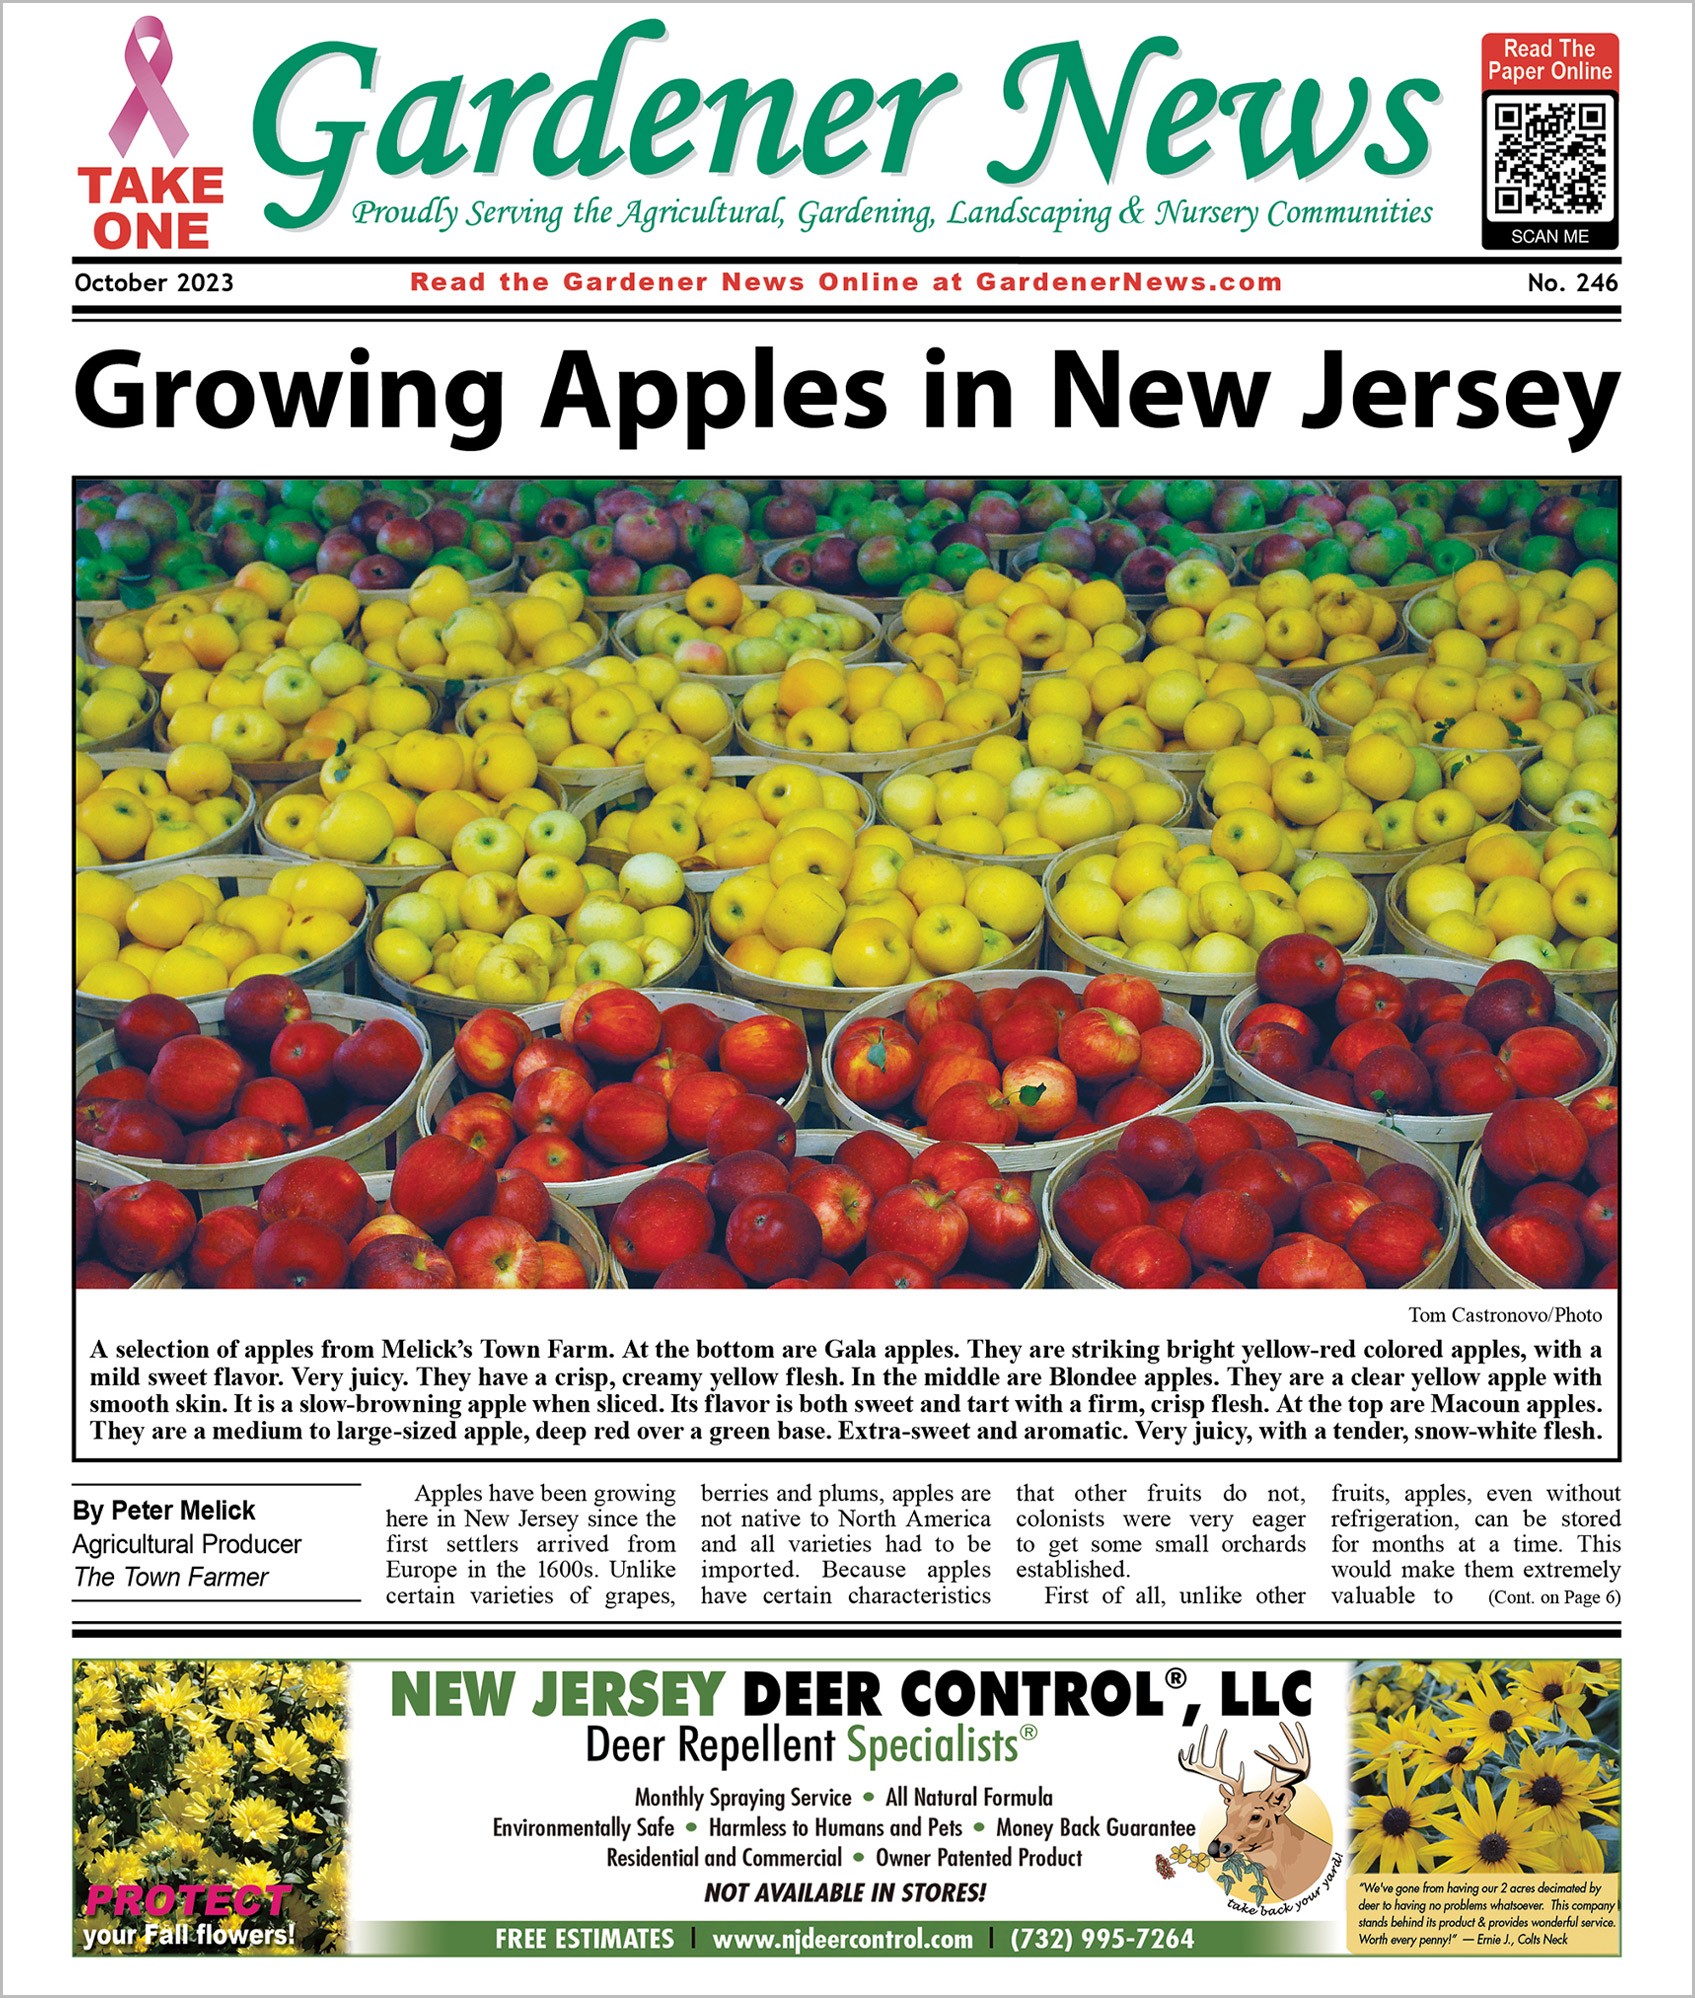 The October 2023 issue of the Gardener News